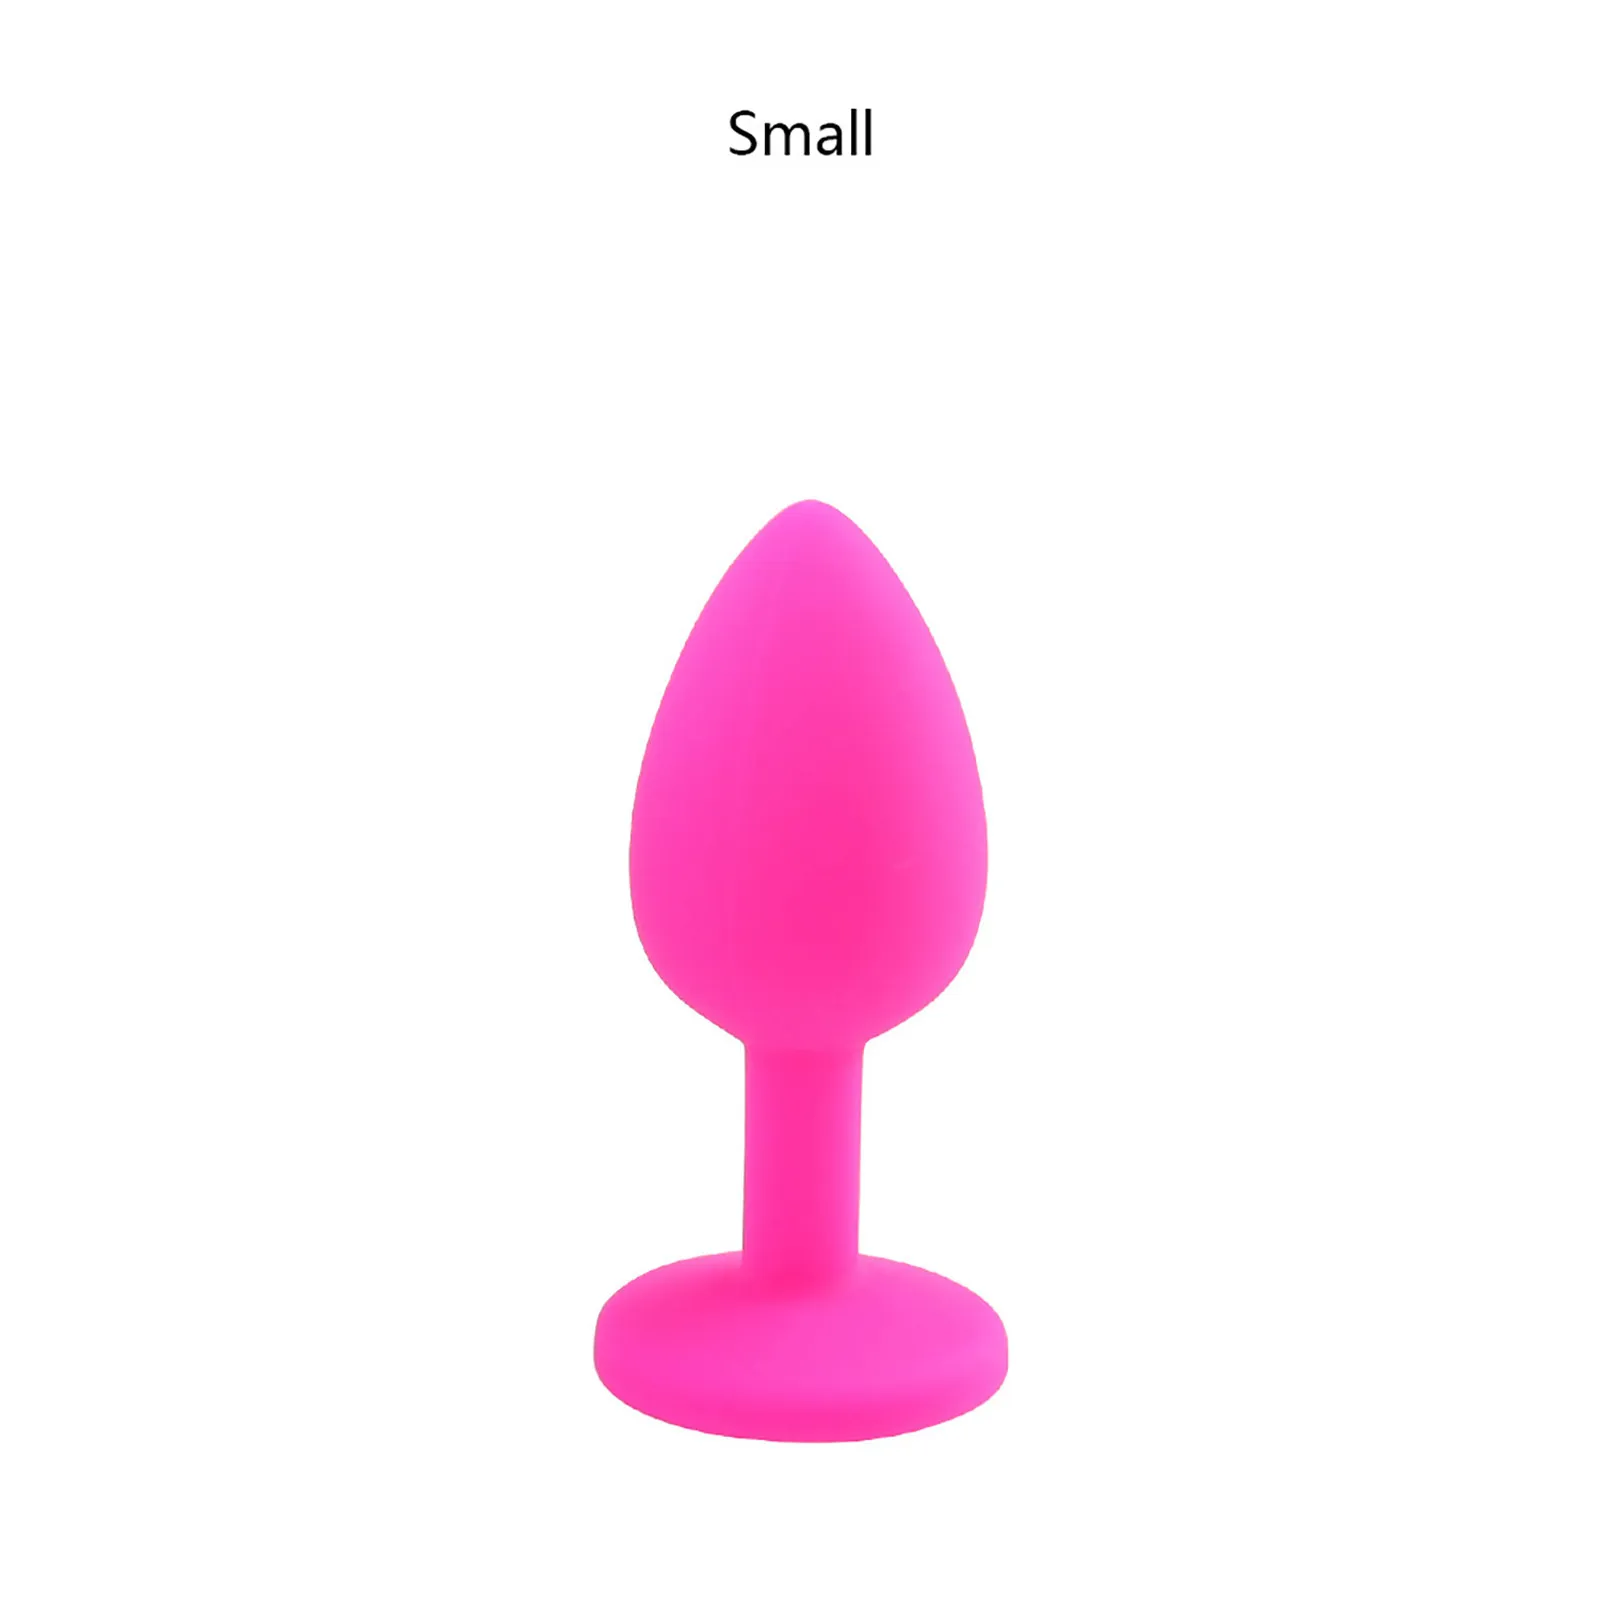 sexyy Silicone Anal Plug Massage Adult Toys For Women Or Man Gay,anal But Set Buttplug Butt s Products